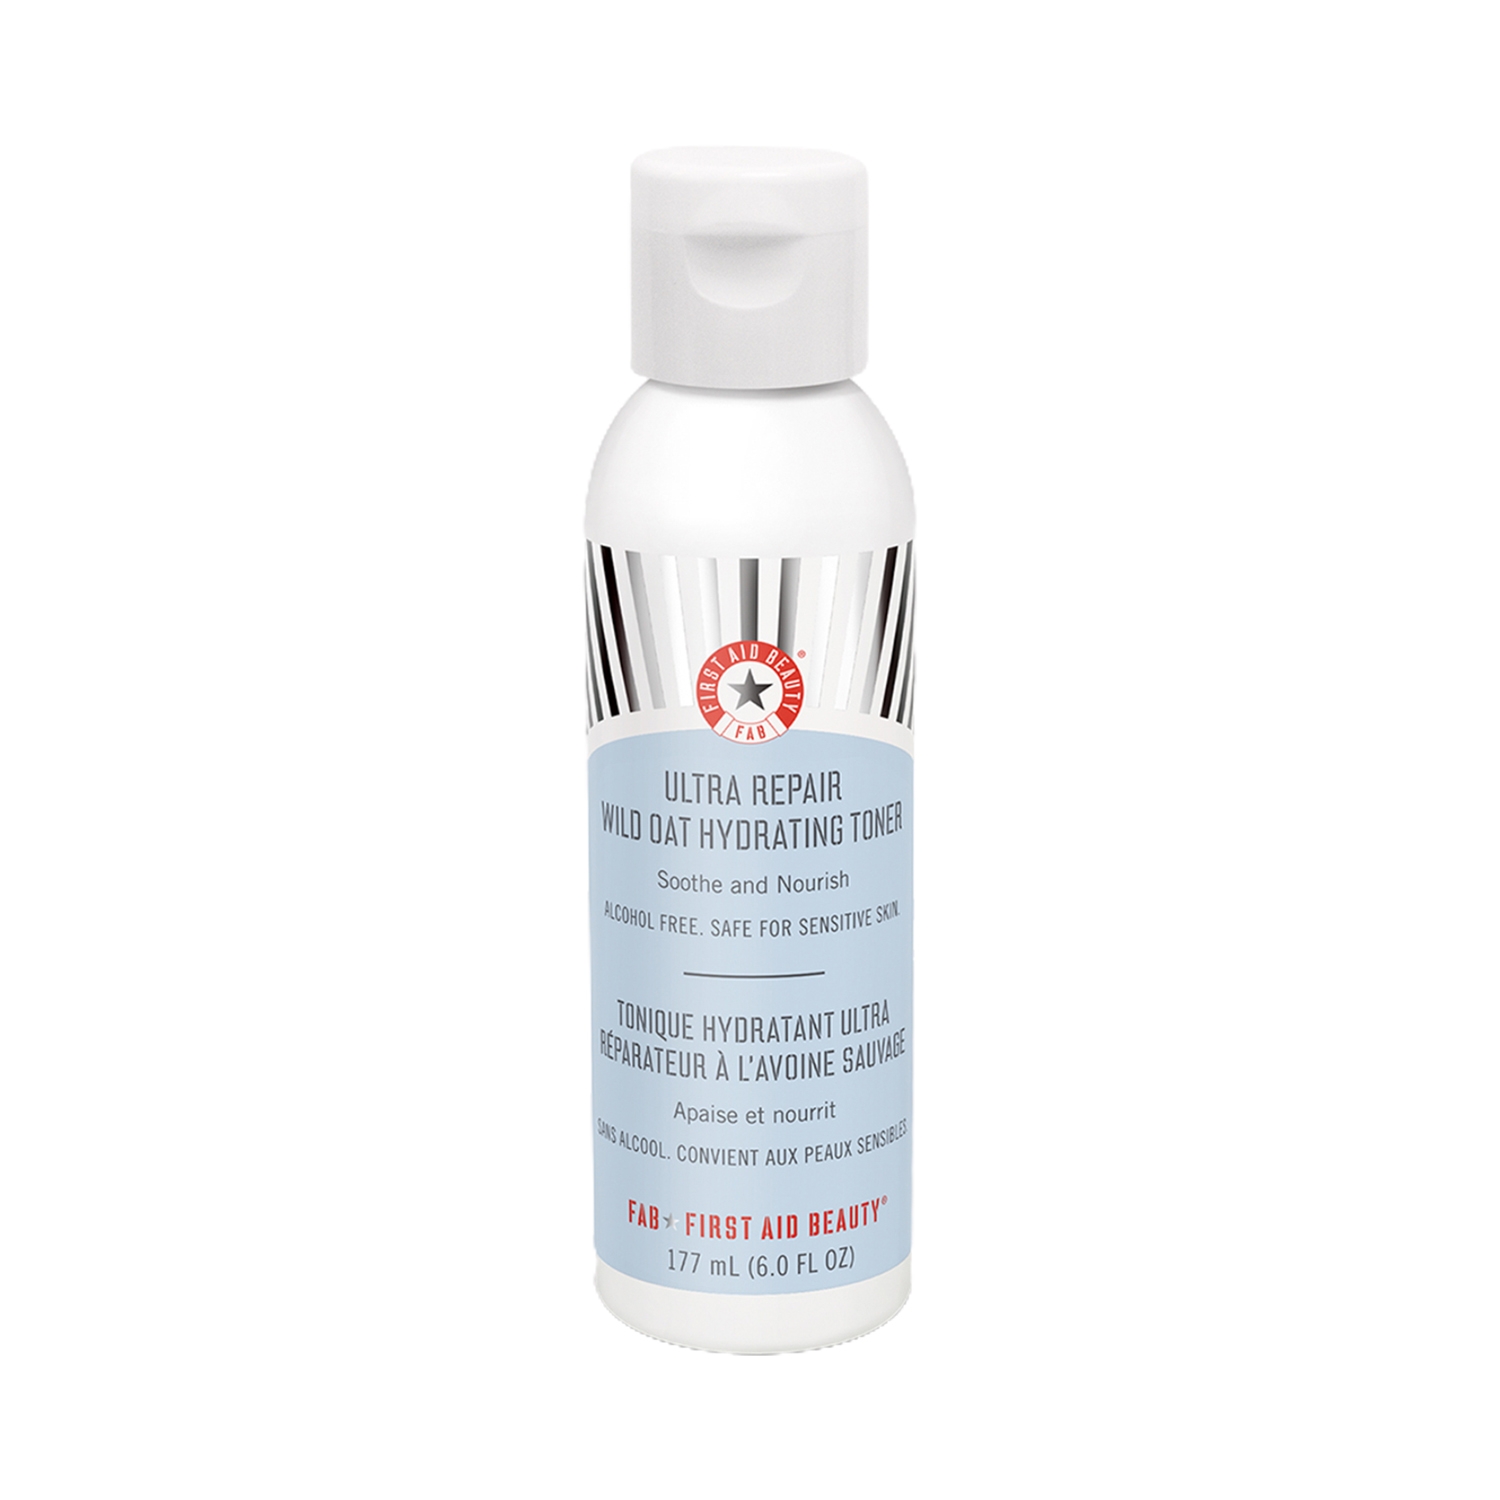 First Aid Beauty | First Aid Beauty Ultra Repair Wild Oat Soothing Toner (177ml)